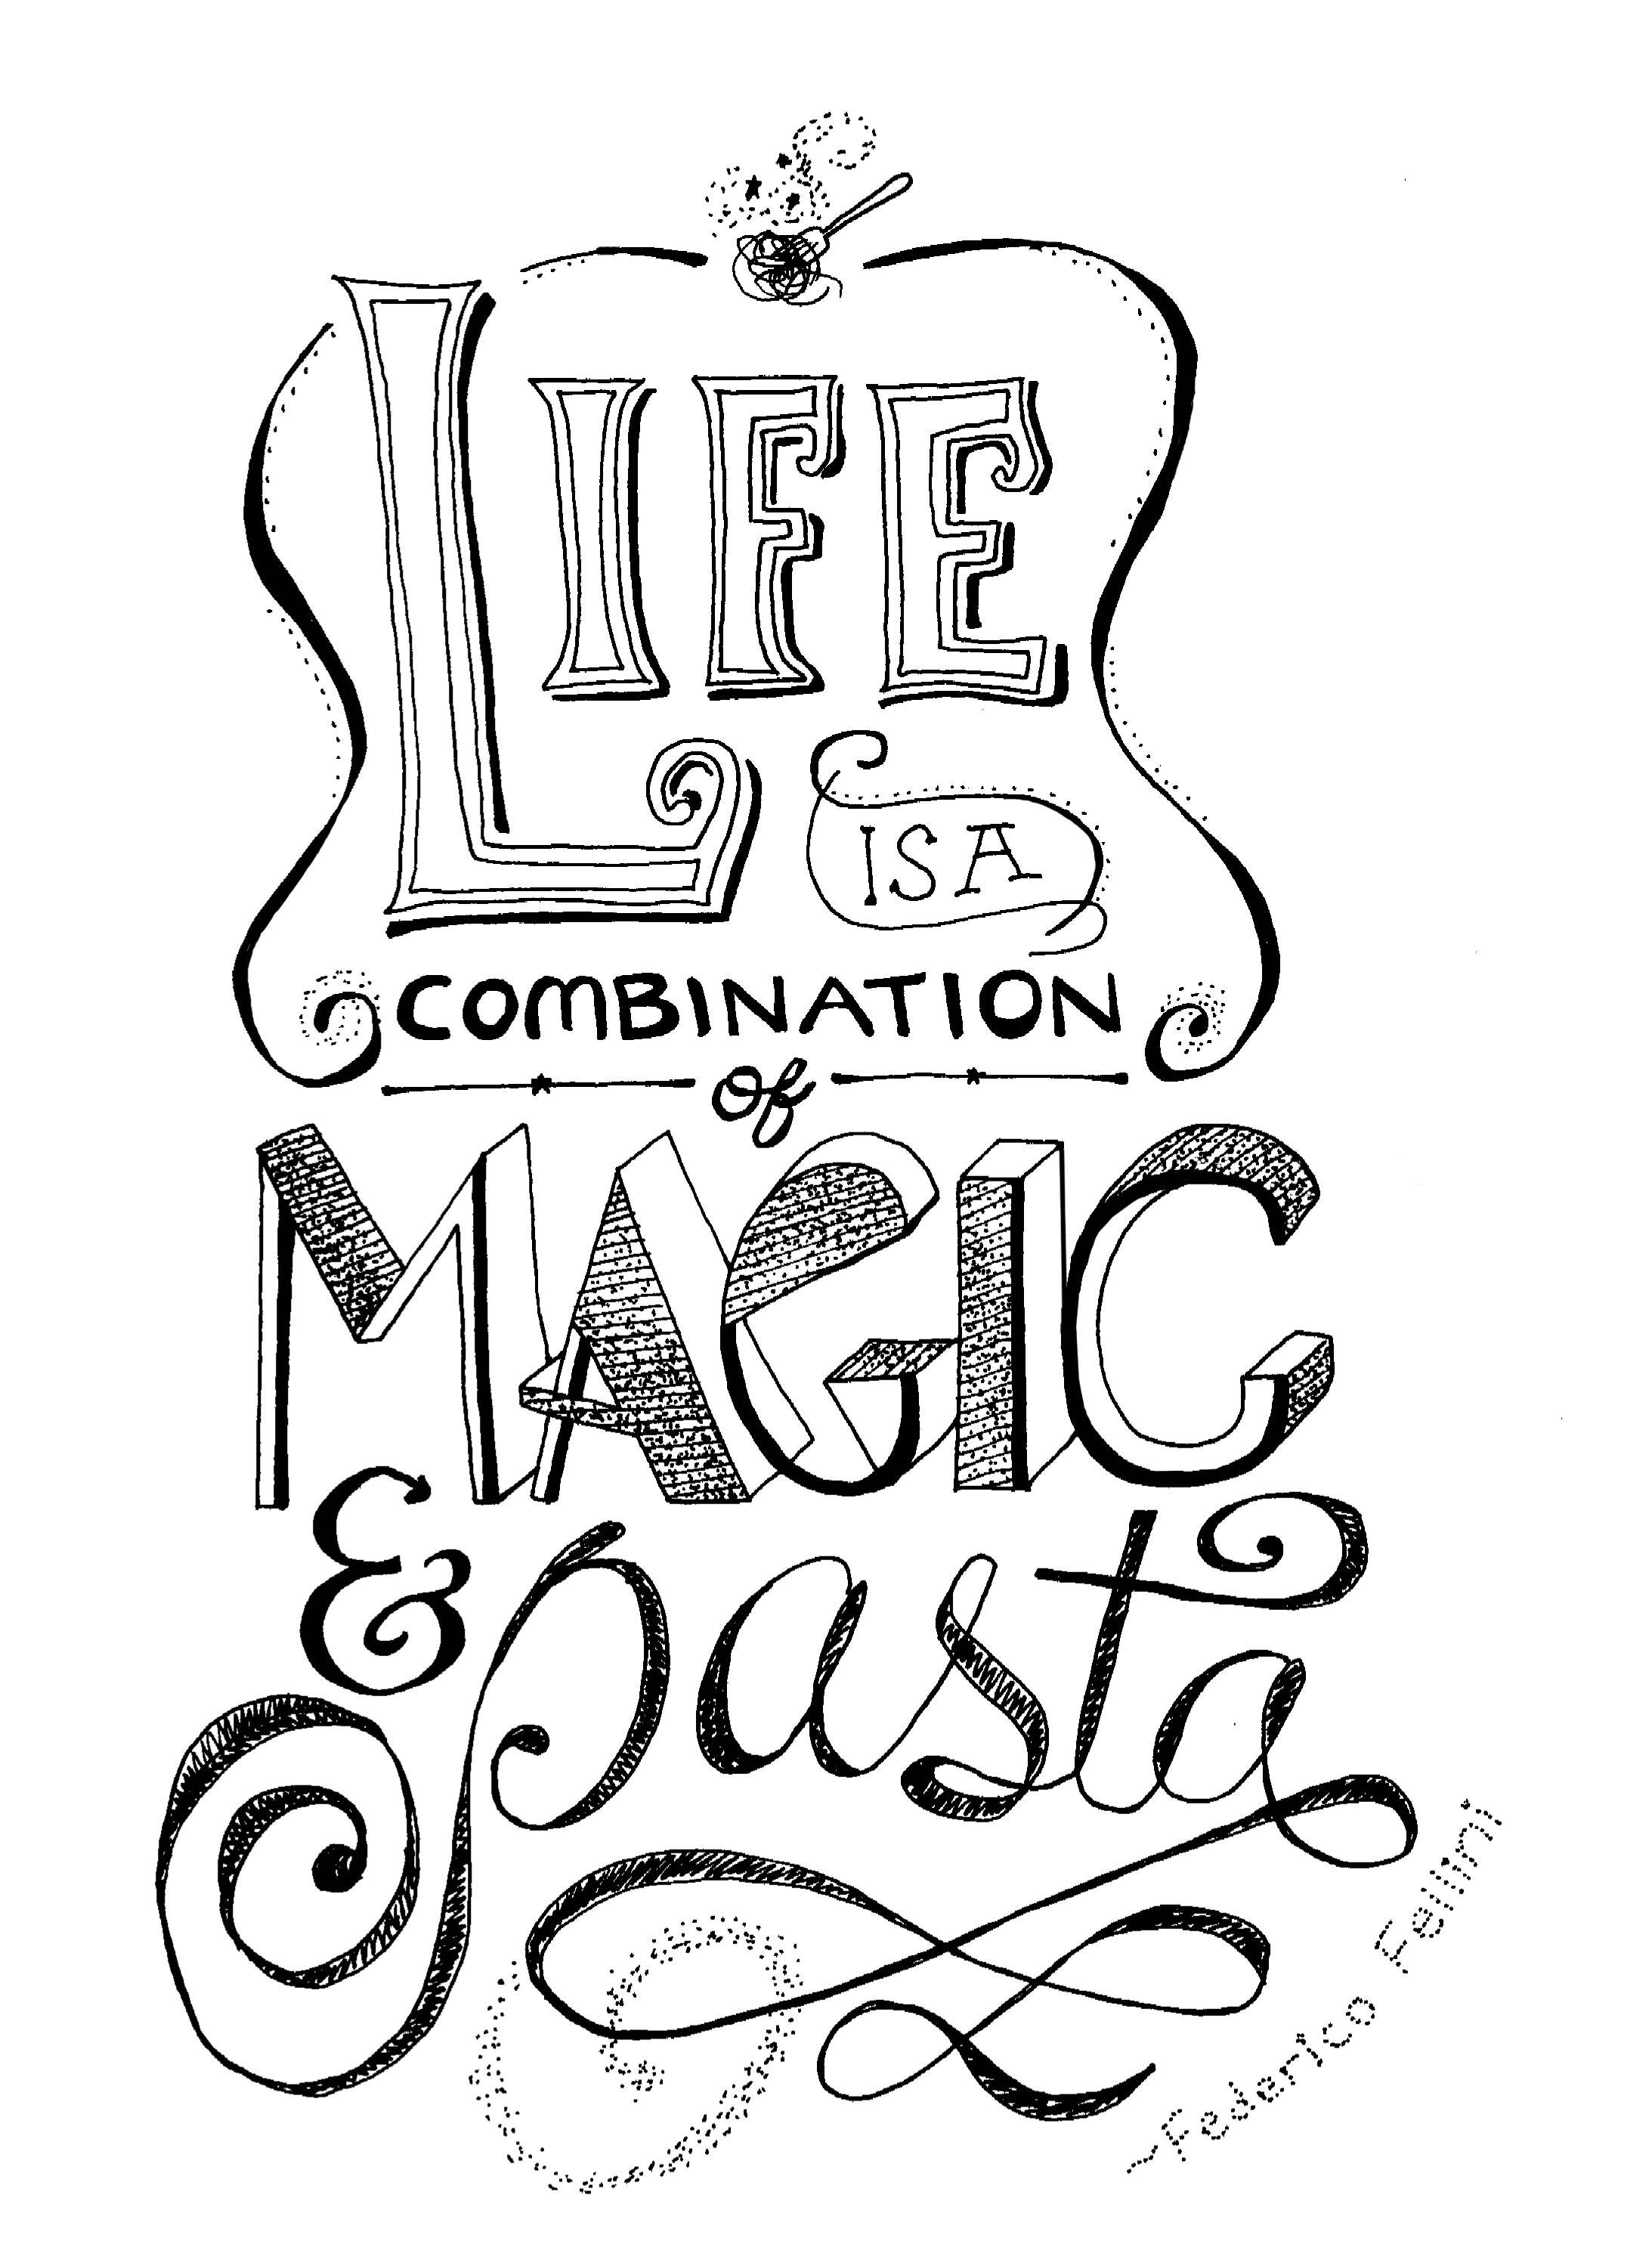 Life is a combination of magic & pasta by Marla S. - Skillshare